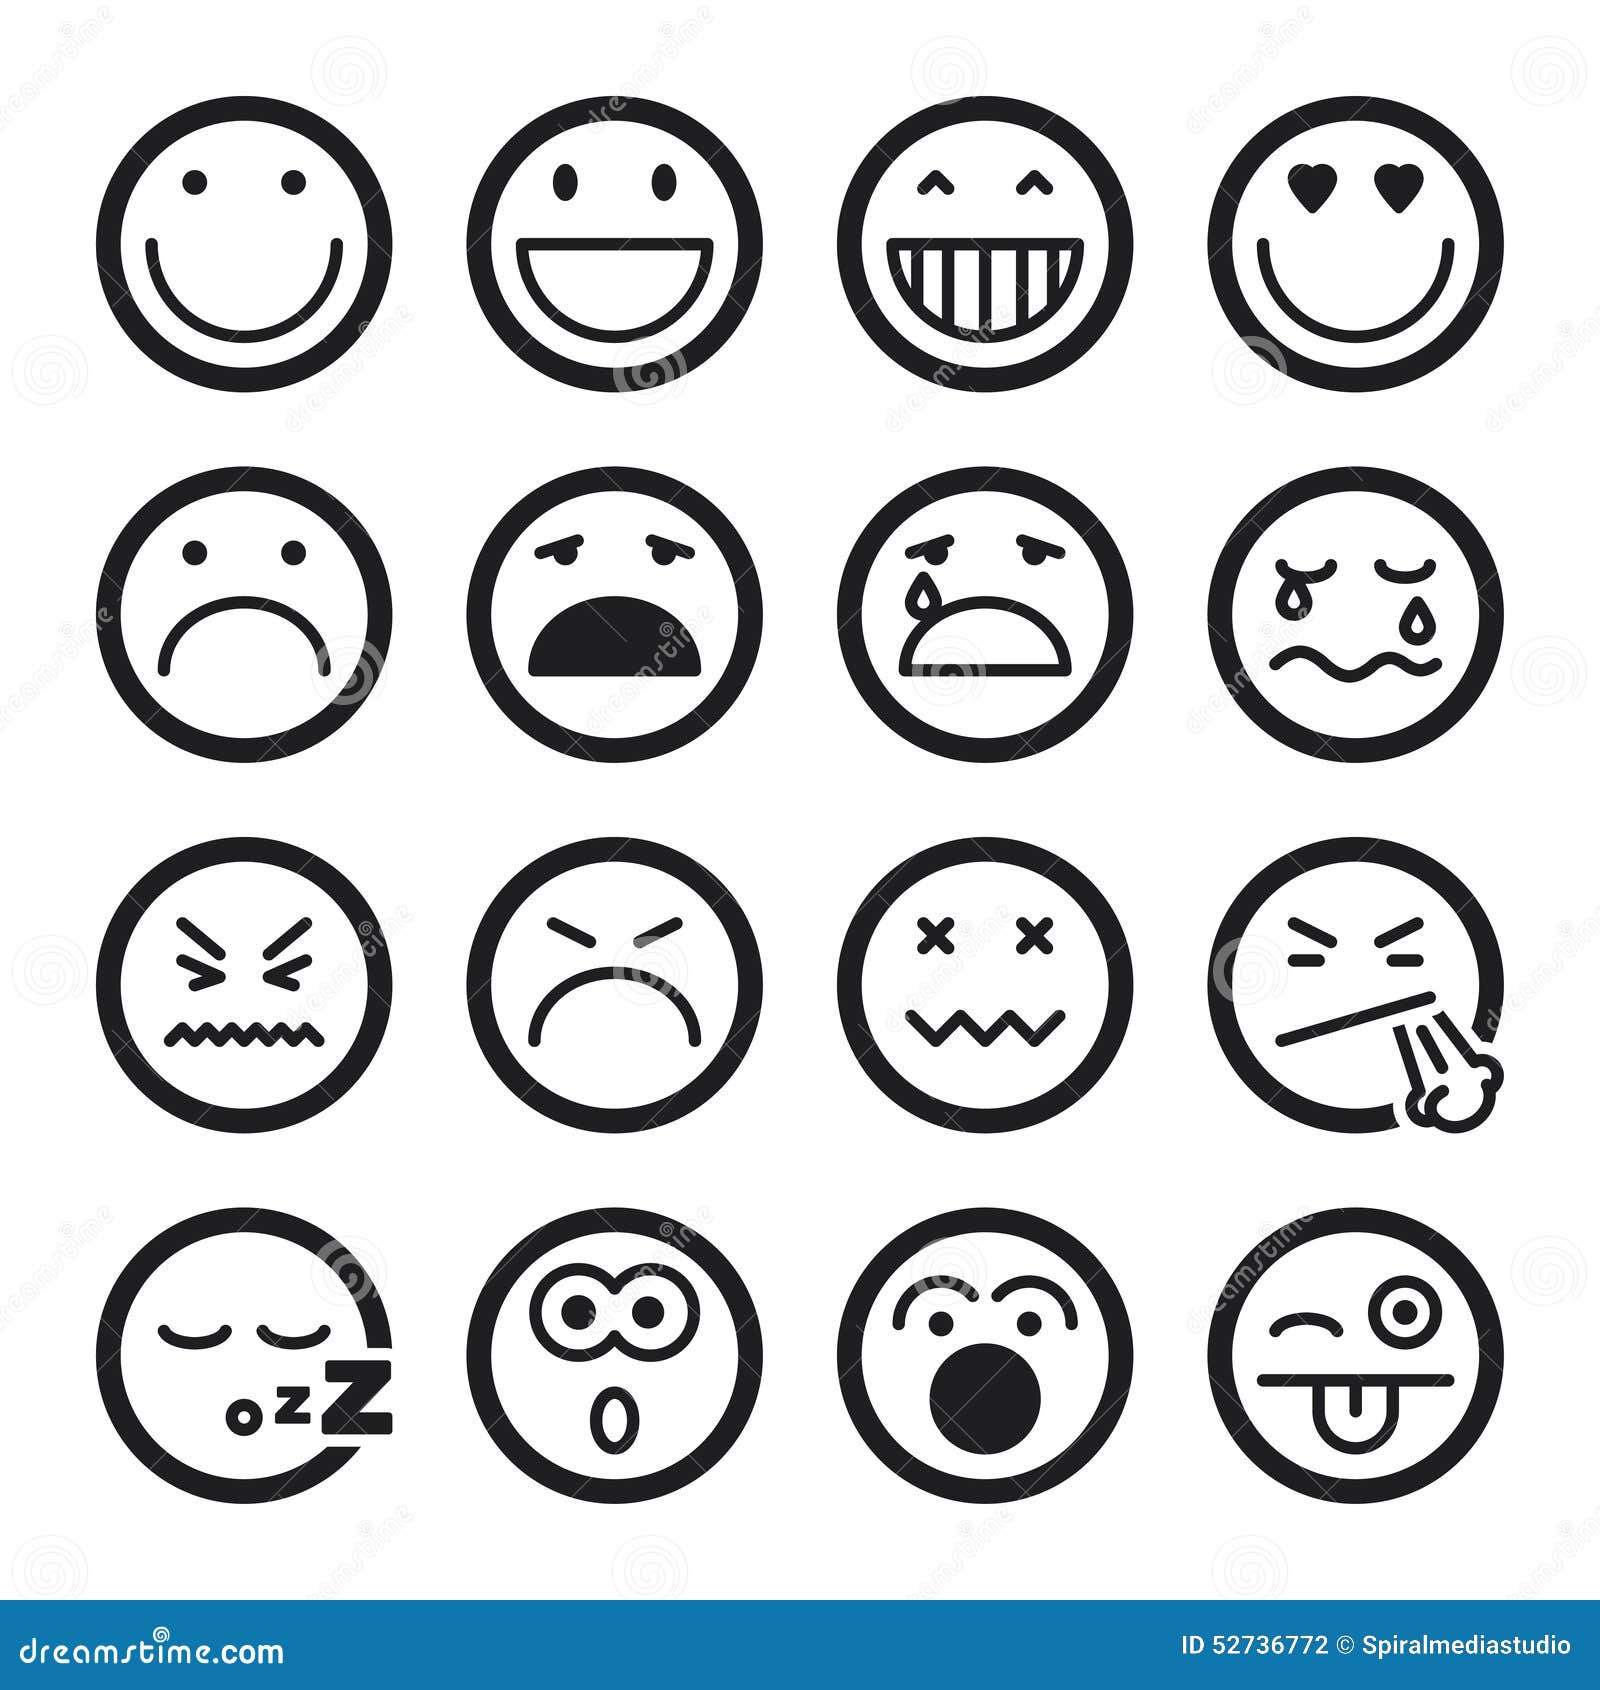 Smiley Flat Icons. Black Stock Vector - Image: 52736772